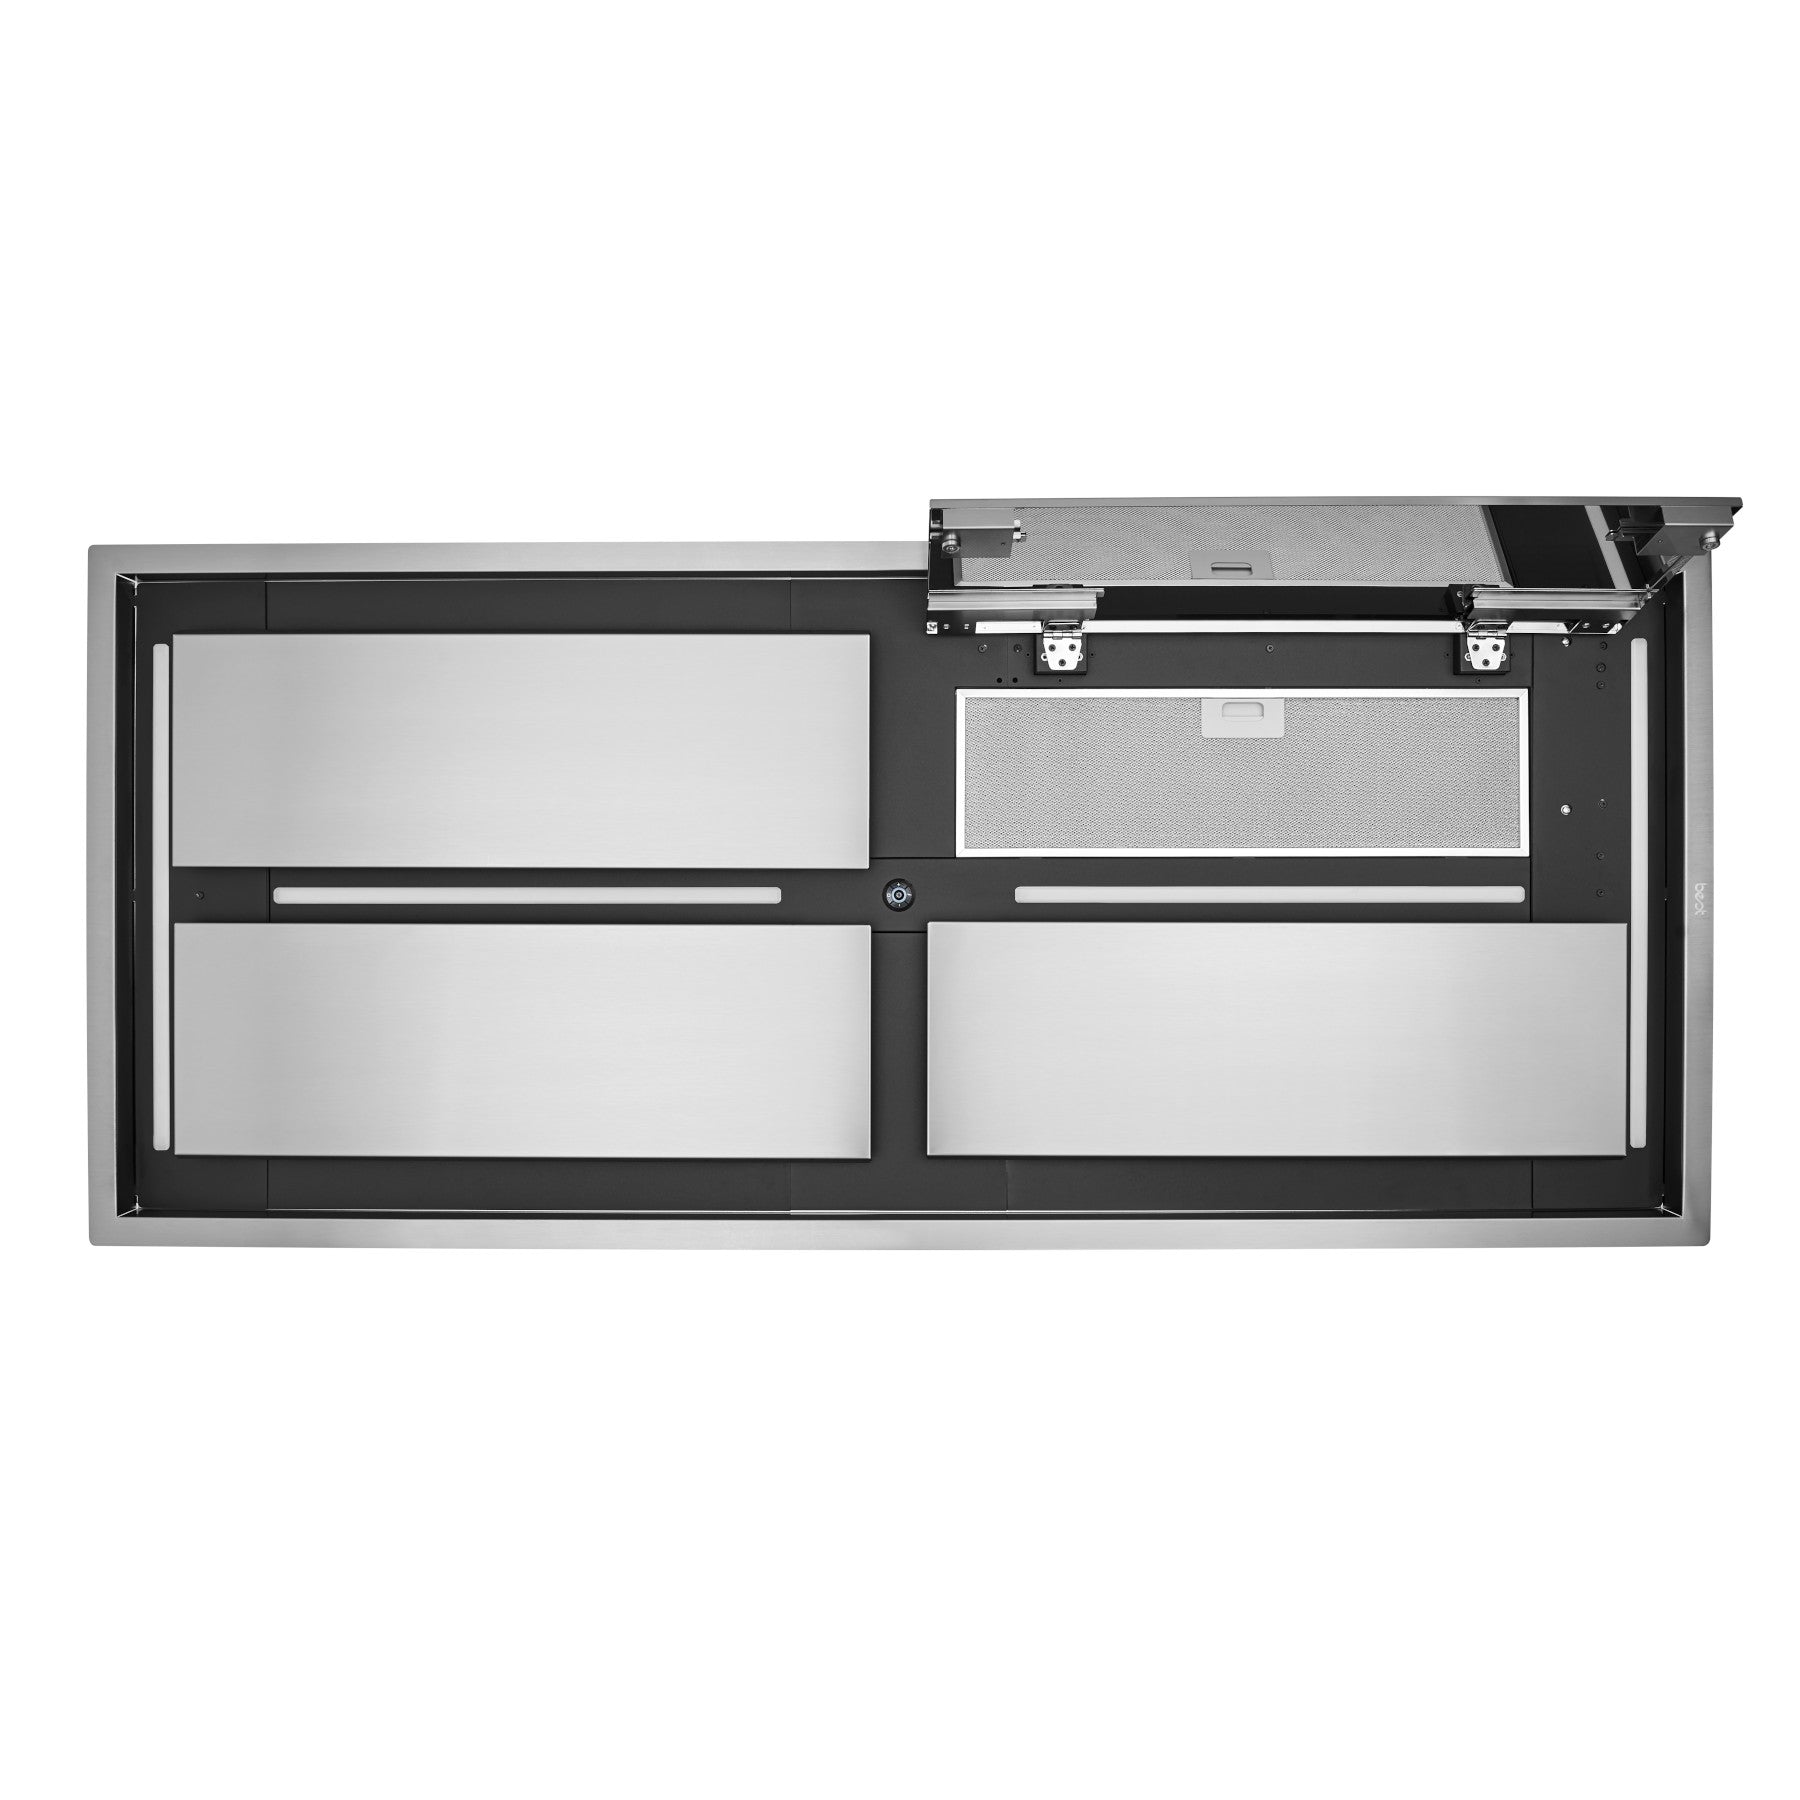 Best - 63.5 Inch Ceiling Mounted Range Hood Vent in Stainless - CC34E63SB